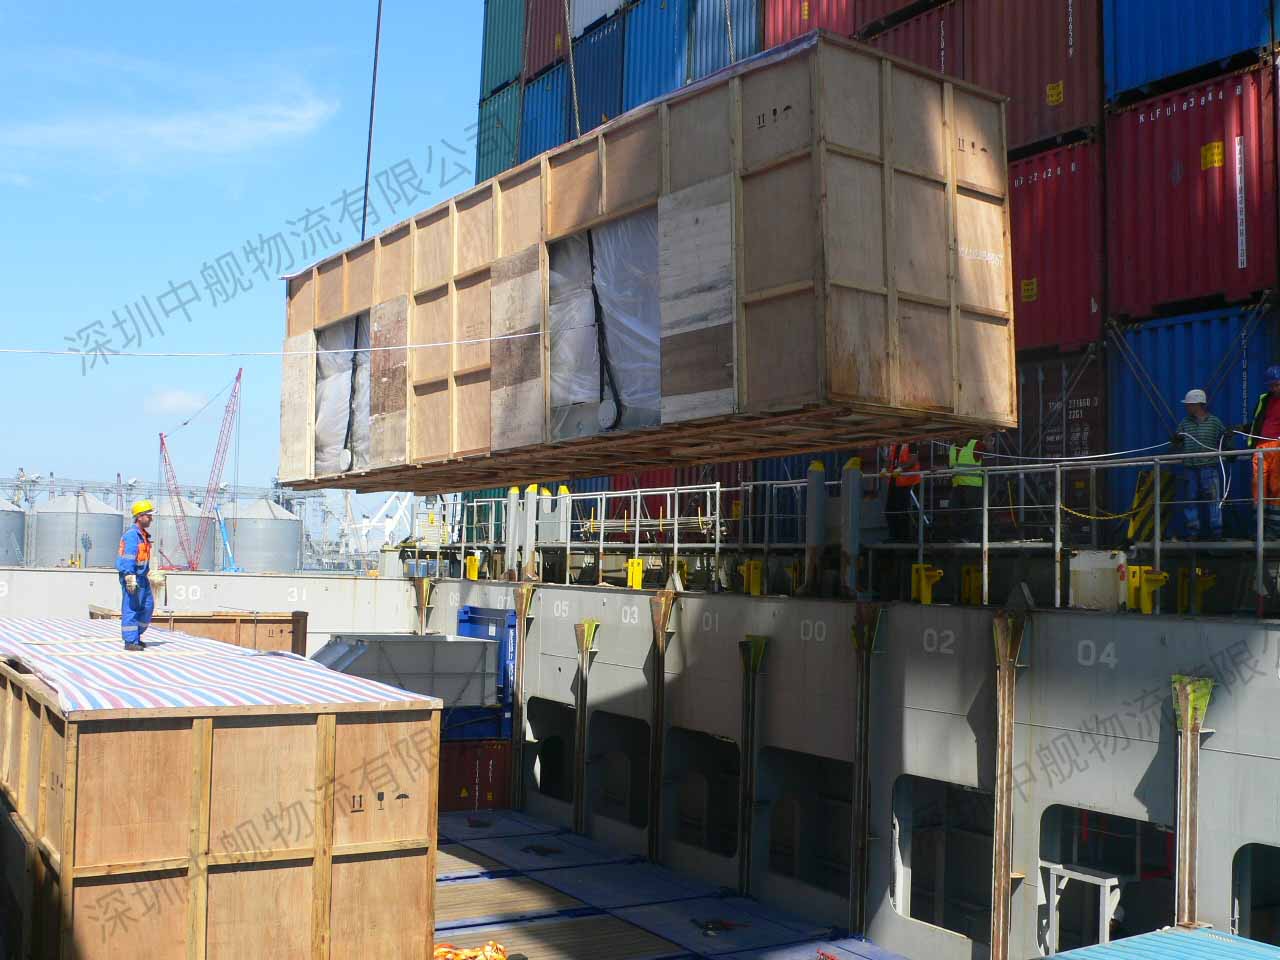 The container ship liner carries a single piece of large and heavy oversized equipment.